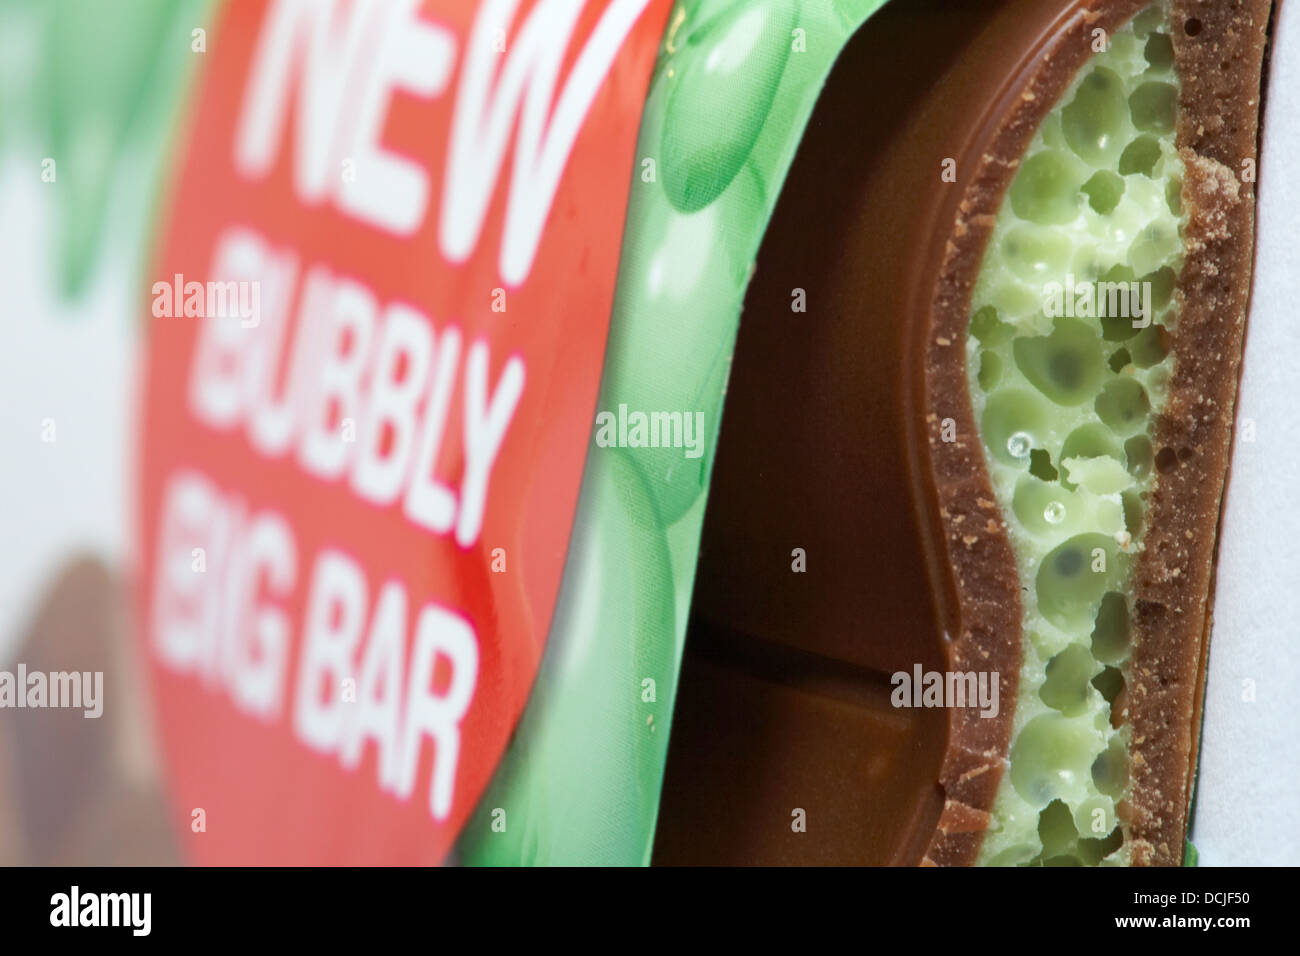 Nestle Mint aero new bubbly big bar of chocolate with piece broken off to see inside Stock Photo